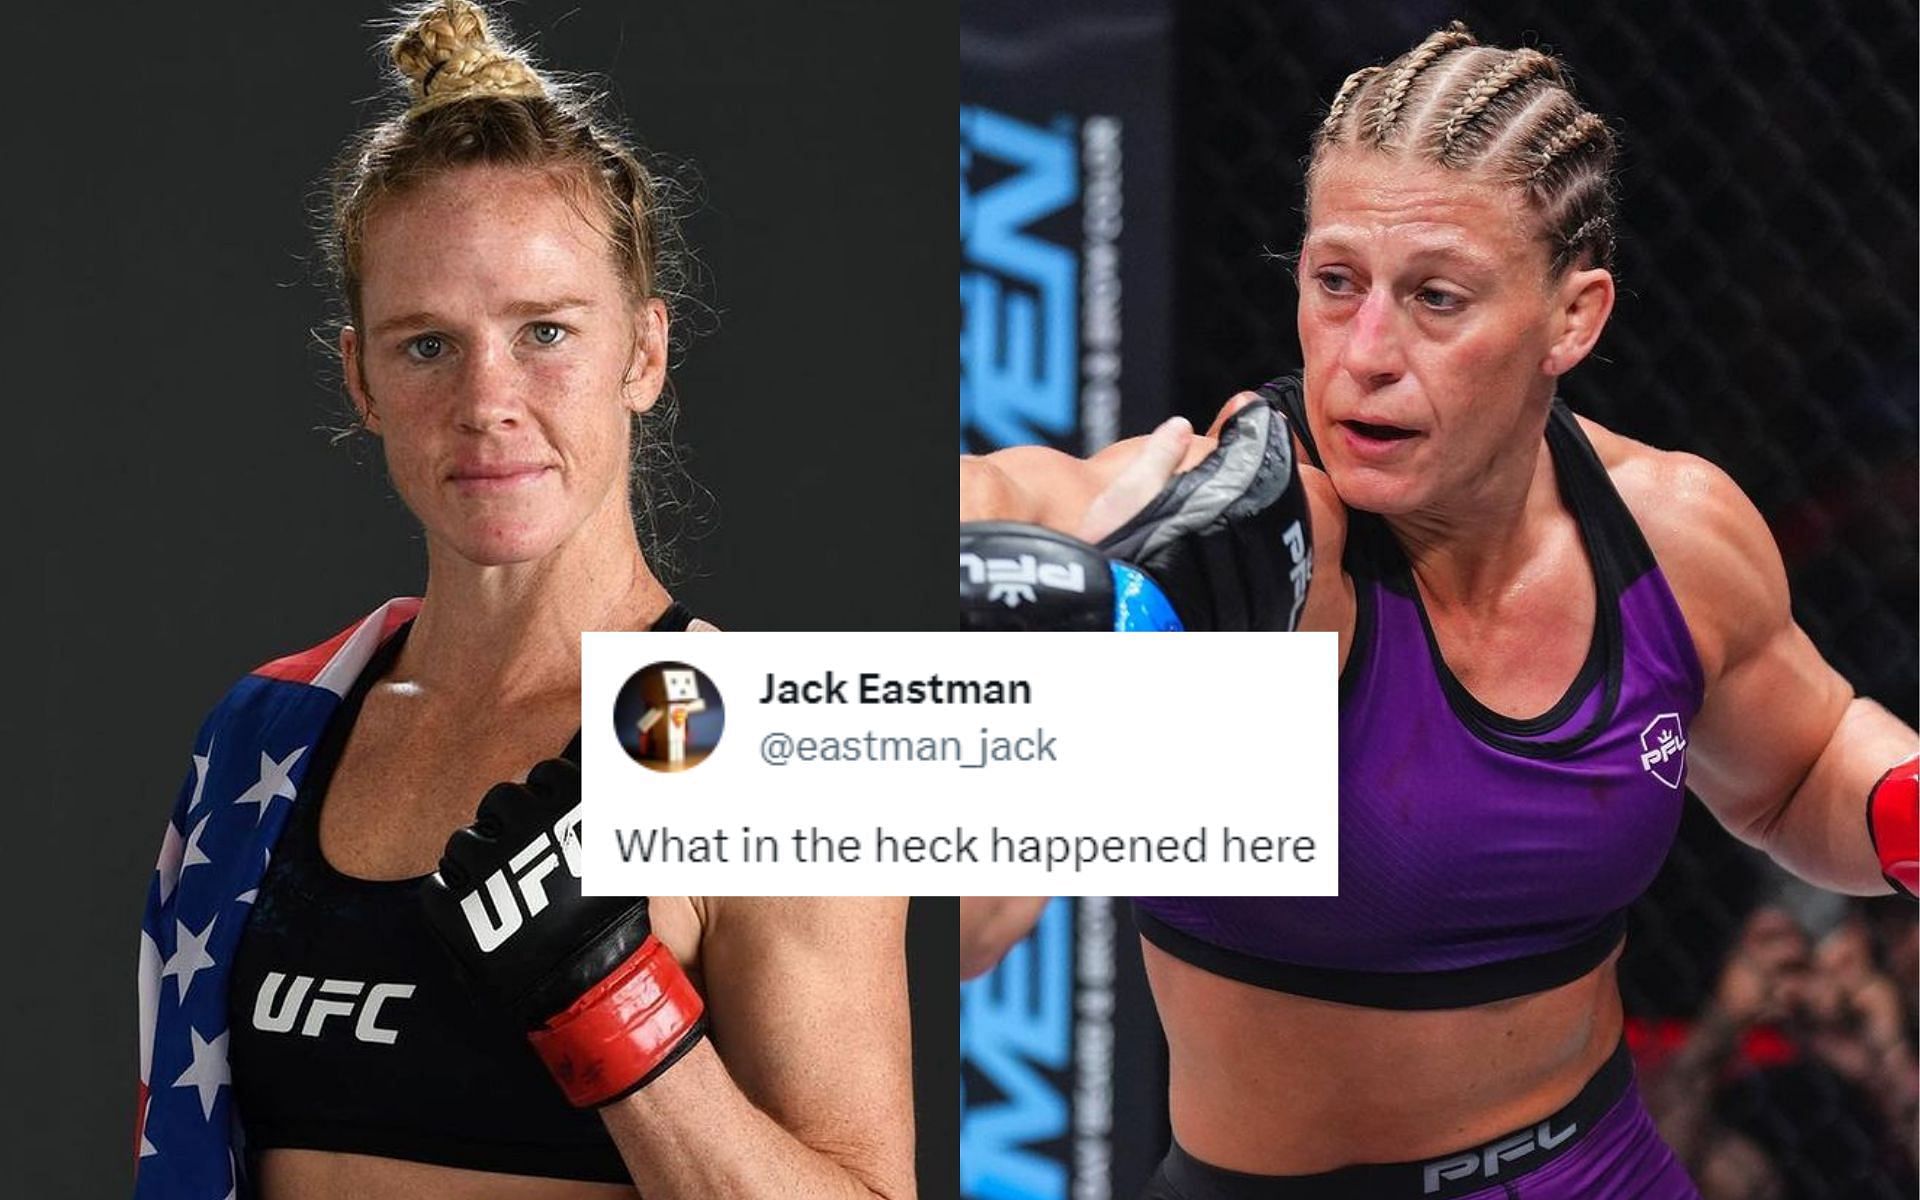 Holly Holm (left) is on a collision course with Kayla Harrison (right) [Images courtesy: @hollyholm and @kaylaharrisonofficial on Instagram]